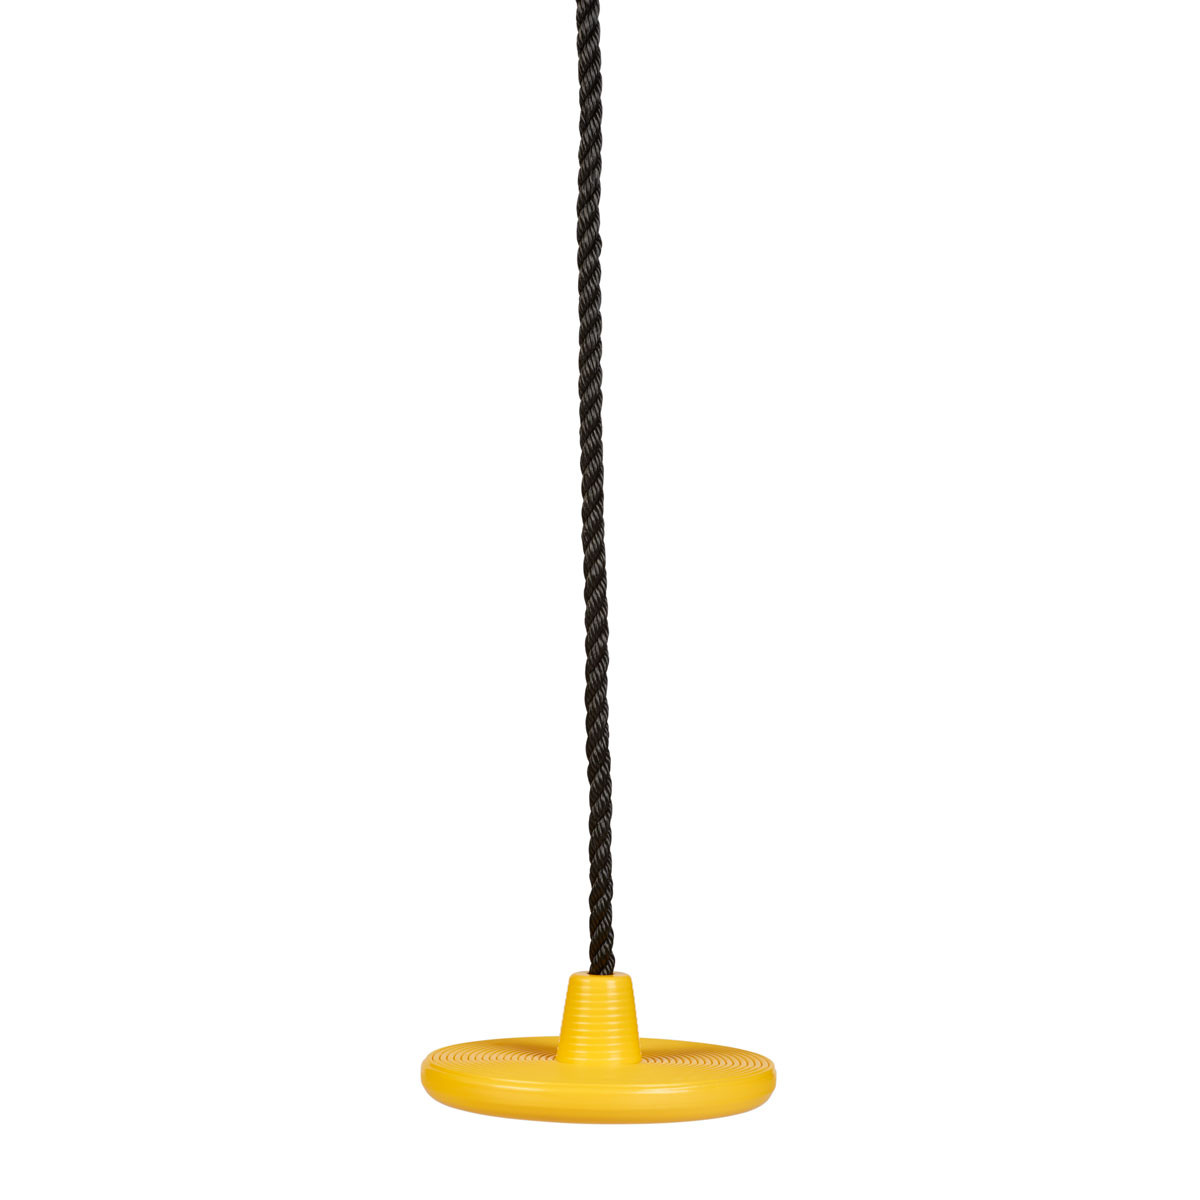 Cyclone Swing Seat - With Rope / Yellow